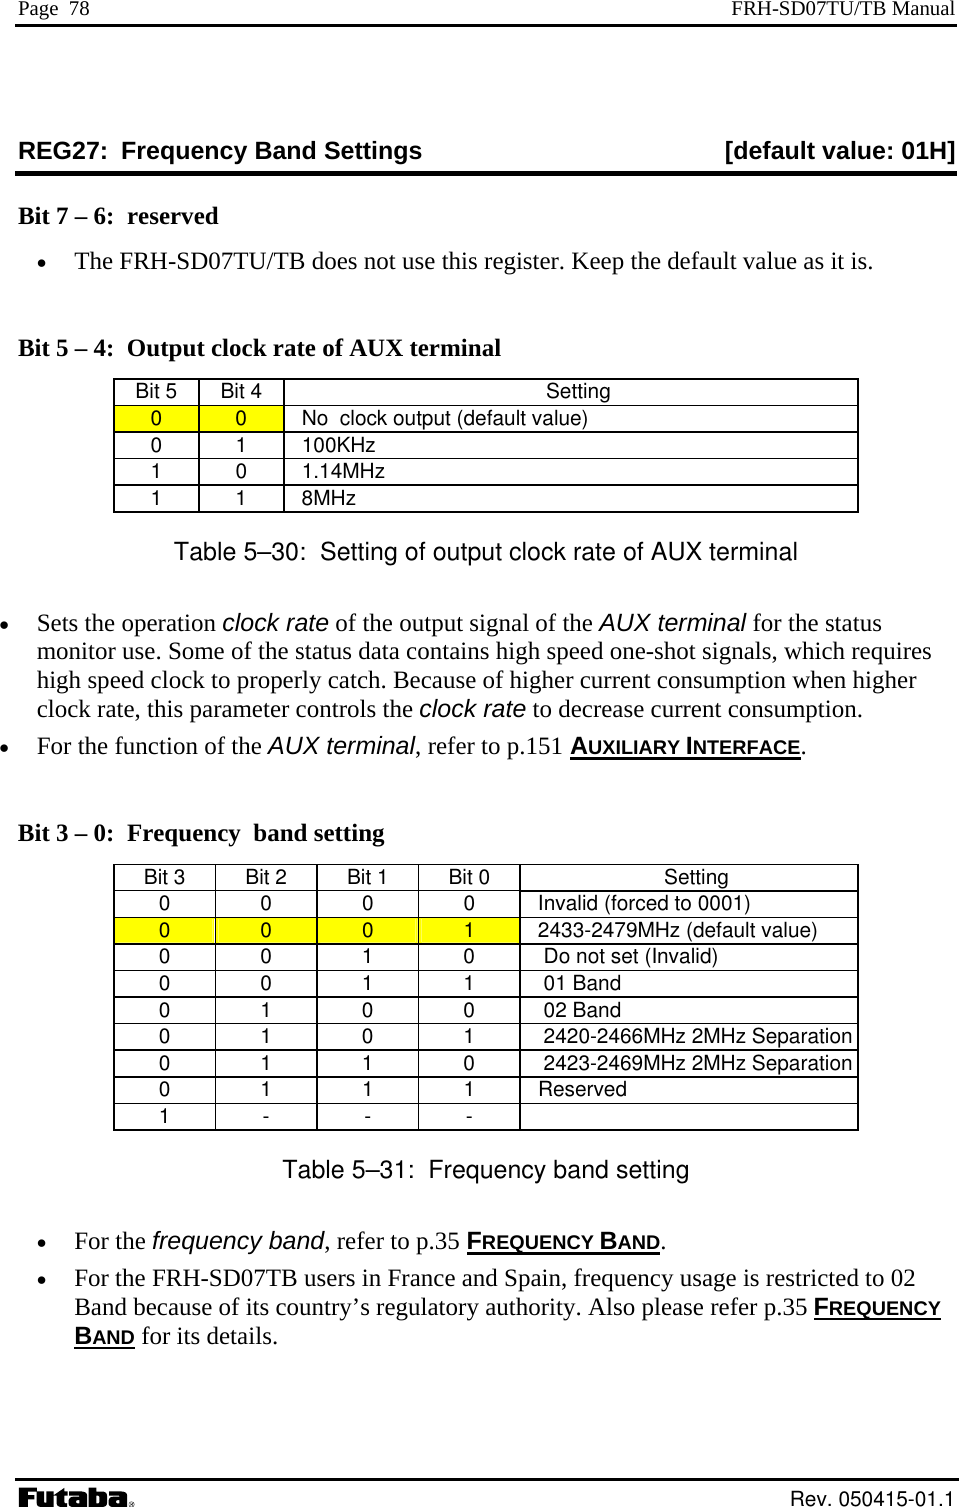 Page  78  FRH-SD07TU/TB Manual REG27:  Frequency Band Setting [default value: 01H] s Bit 7 – 6:  reserved •  The FR -S r. Keep the default value as it is.  Bit 5 – 4:  Output clock raBit 5  Bit 4    Setting H D07TU/TB does not use this registete of AUX terminal  0  0    No  clock output (default value) 0 1  100KHz 1 0  1.14MHz 1 1  8MHz Table 5–30:  Setting of output clock rate of AUX terminal •  Sets the operation clock rate of the output signal of the AUX terminal for the status  ires higclo ption. •  or the function of the AUX terminal, refer to p.151 AUXILIARY INTERFACEmonitor use. Some of the status data contains high speed one-shot signals, which requh speed clock to properly catch. Because of higher current consumption when higher ck rate, this parameter controls the clock rate to decrease current consumF.  B 3it   – 0:  Frequency  band setting Bit 3  Bit 2  Bit 1  Bit 0  Setting 0  0  0  0  Invalid (forced to 0001) 0  0  0  1  2433-2479MHz (default value) 0  0  1  0   Do not set (Invalid) 0 0 1 1  01 Band 0 1 0 0  02 Band 0  1  0  1   2420-2466MHz 2MHz Separation 0  1  1  0   2423-2469MHz 2MHz Separation 0 1 1 1 Reserved 1 - - -  Table 5–31:  Frequency band setting •  For the frequency band, refer to p.35 FREQUENCY BAND. •  For the FRH-SD07TB users in France and Spain, frequency usage is restricted to 02 Band because of its country’s regulatory authority. Also please refer p.35 FREQUENCY BAND for its details.  Rev. 050415-01.1 